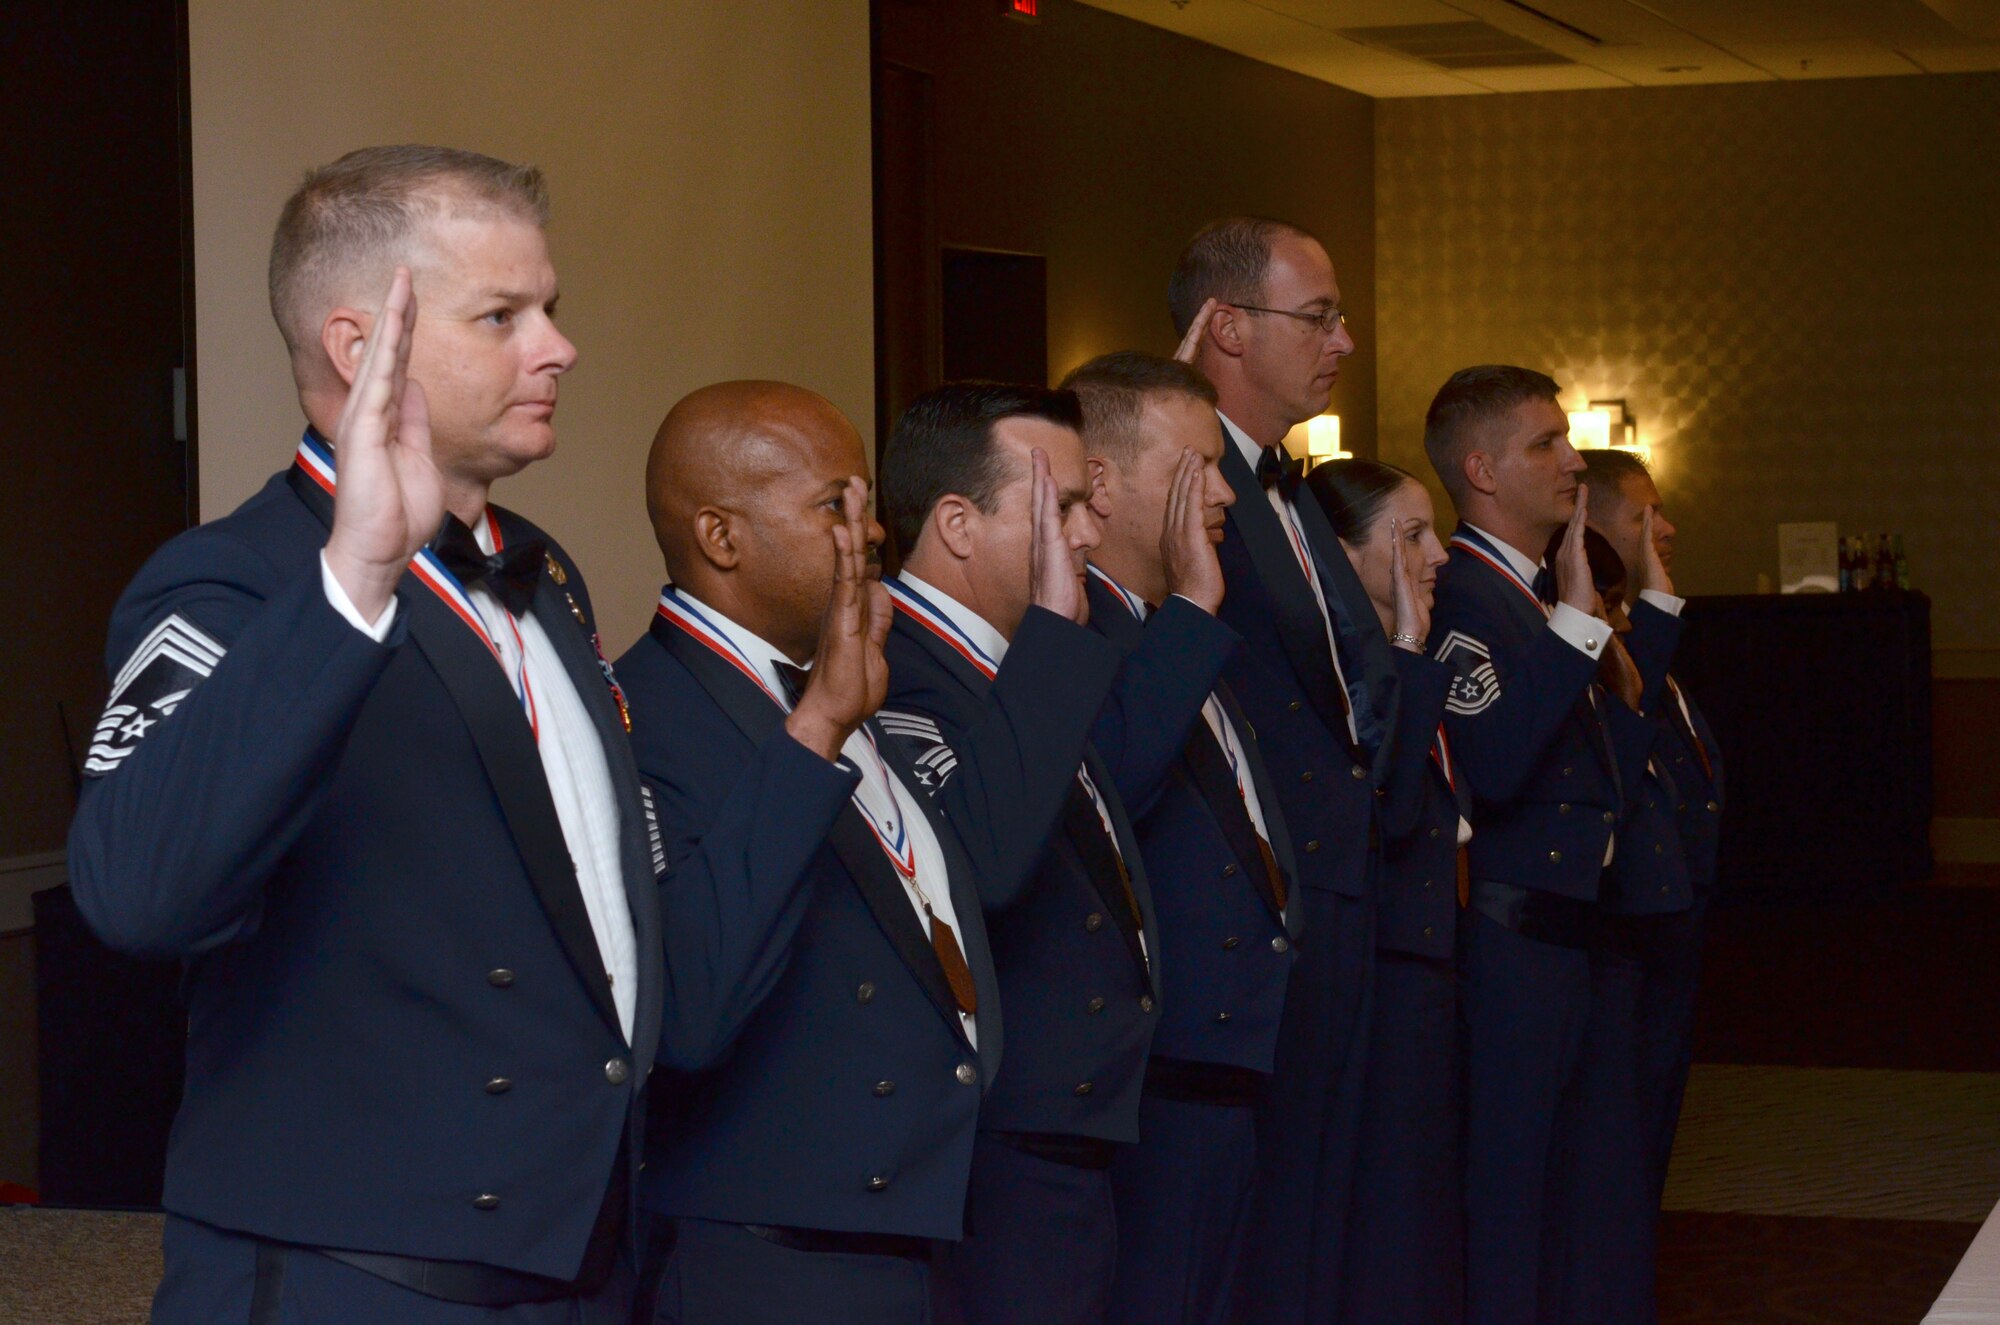 Nine new Air Force chief master sergeants and chief selects raise their right hands and repeat the Chief's Oath during the Space Coast Chief Master Sergeant Recognition Ceremony March 5, 2016, in Cocoa Beach, Florida. Approximately one percent of Airmen achieve the rank of chief, the highest enlisted rank in the Air Force. (U.S. Air Force photo by Tech. Sgt. Michael Means)